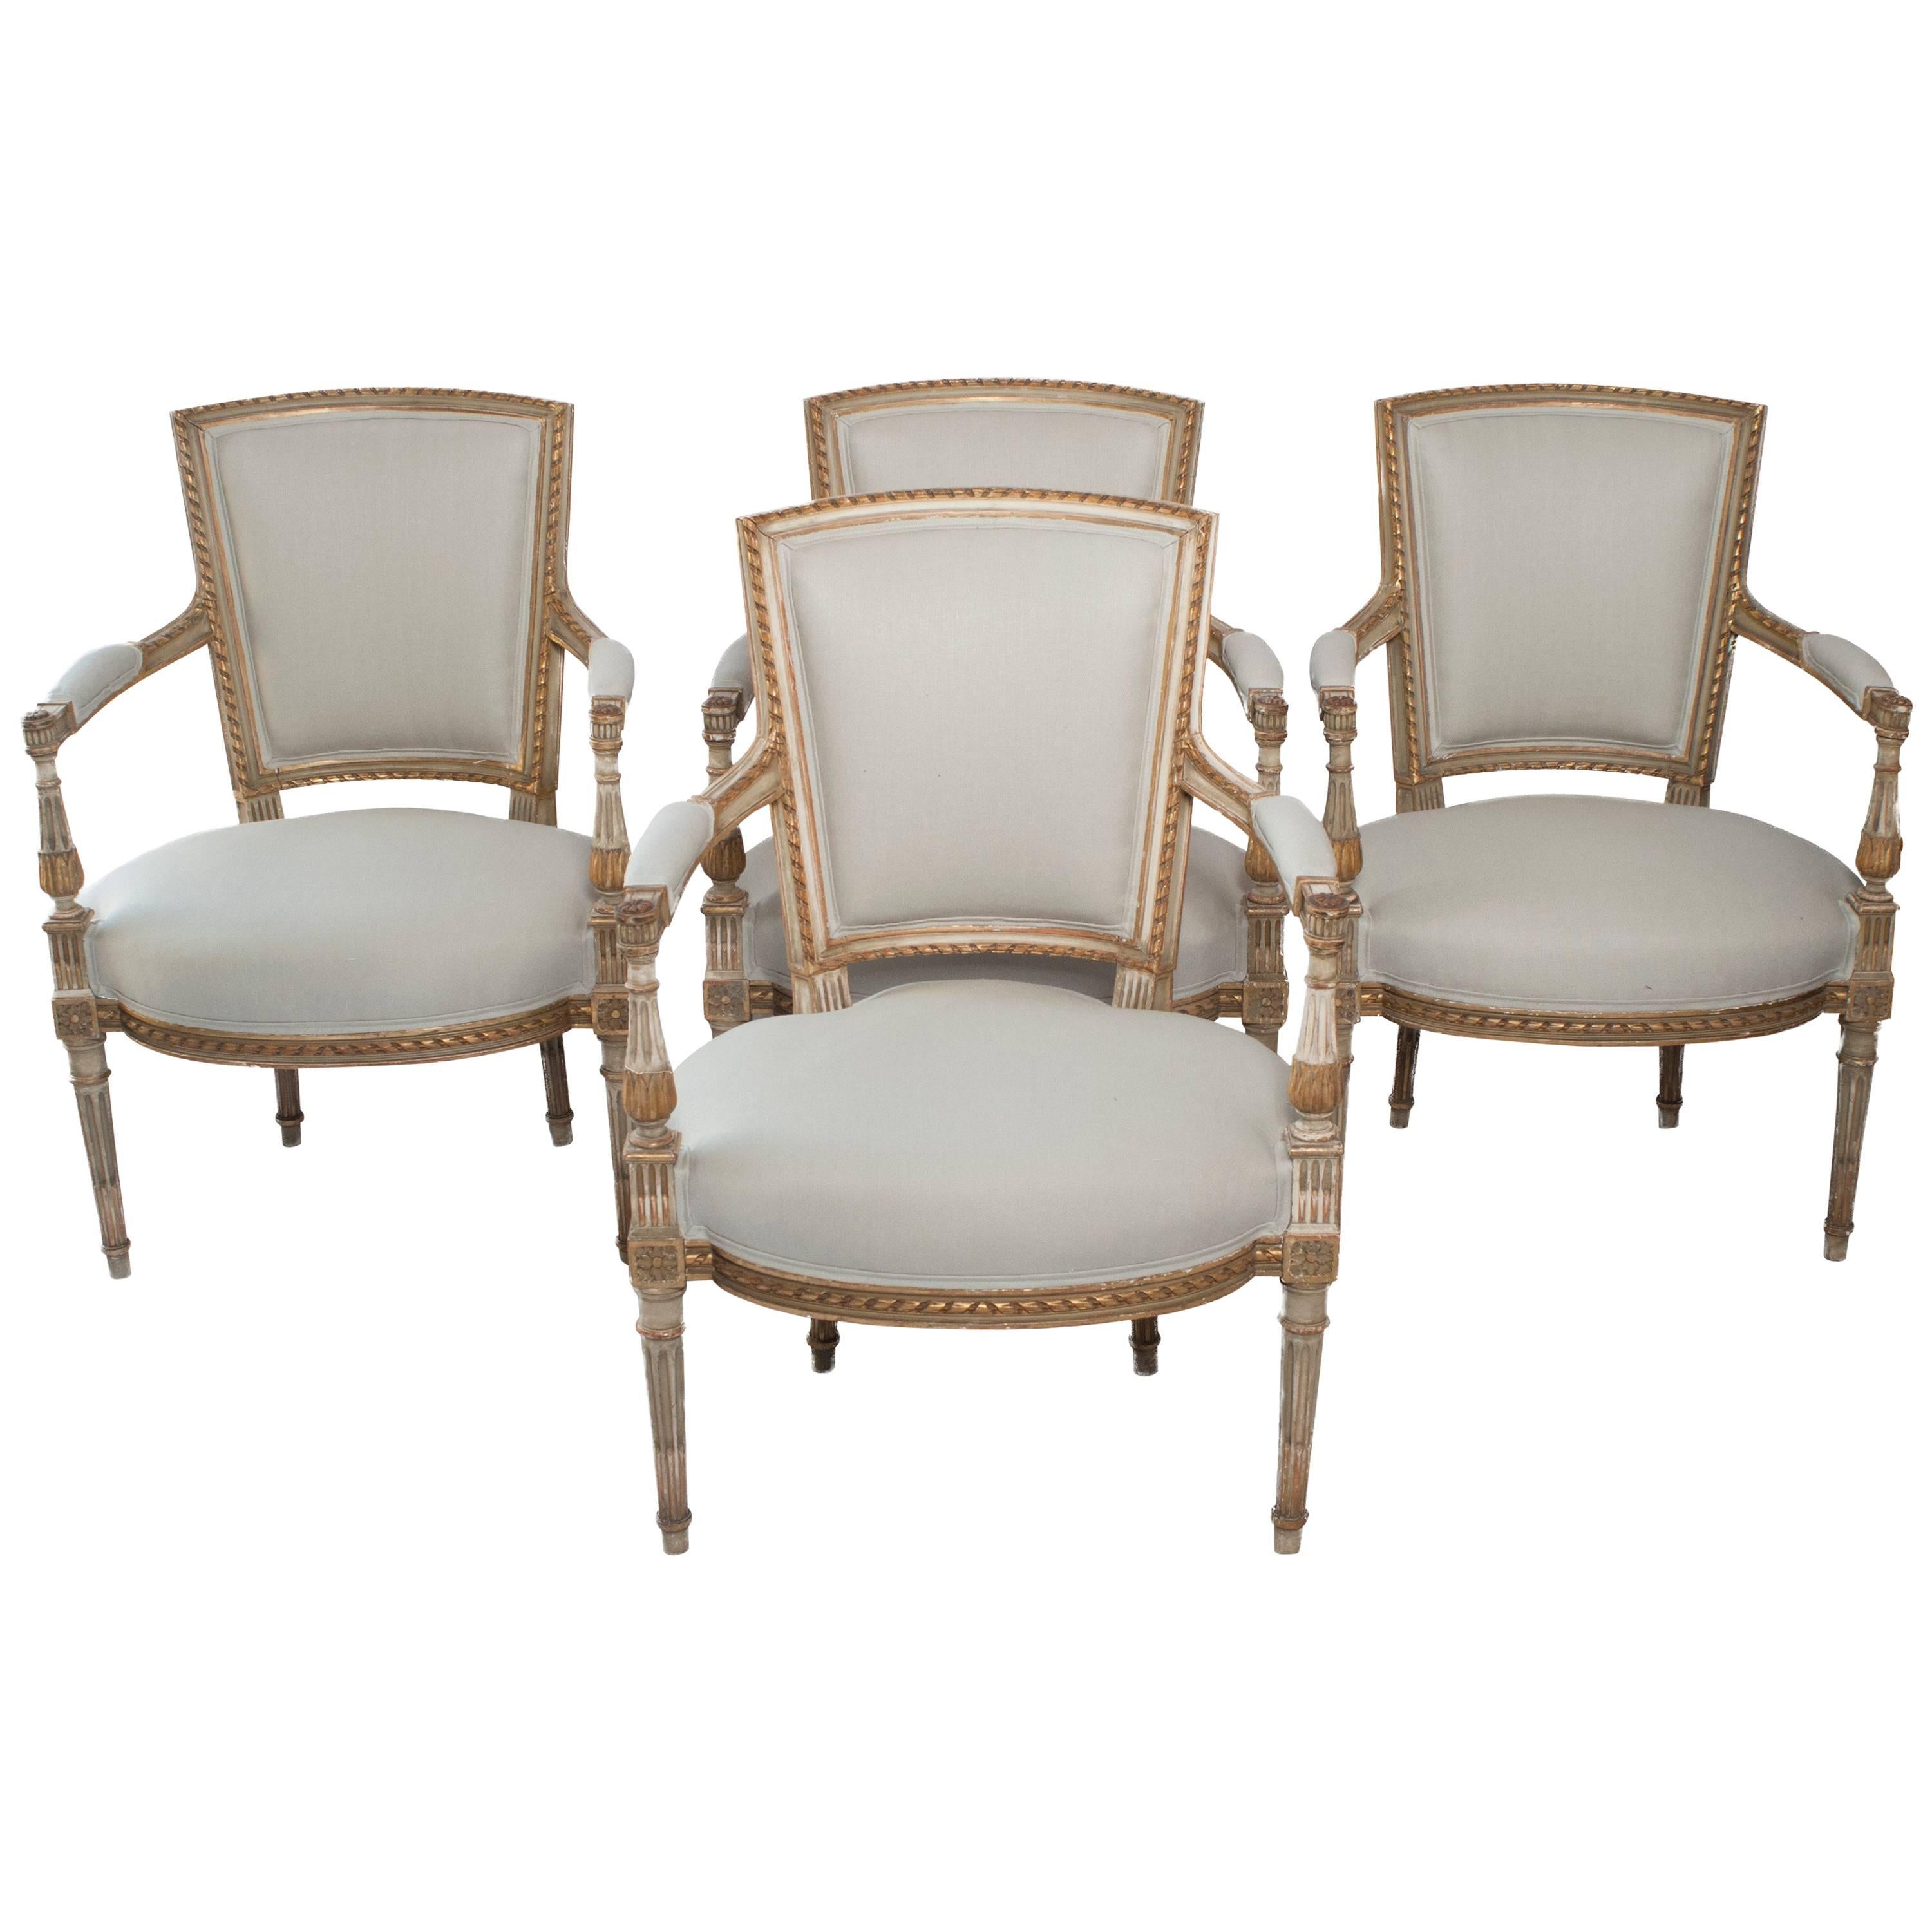 Set of Four Painted and Gilt Napoleon III Fauteuils